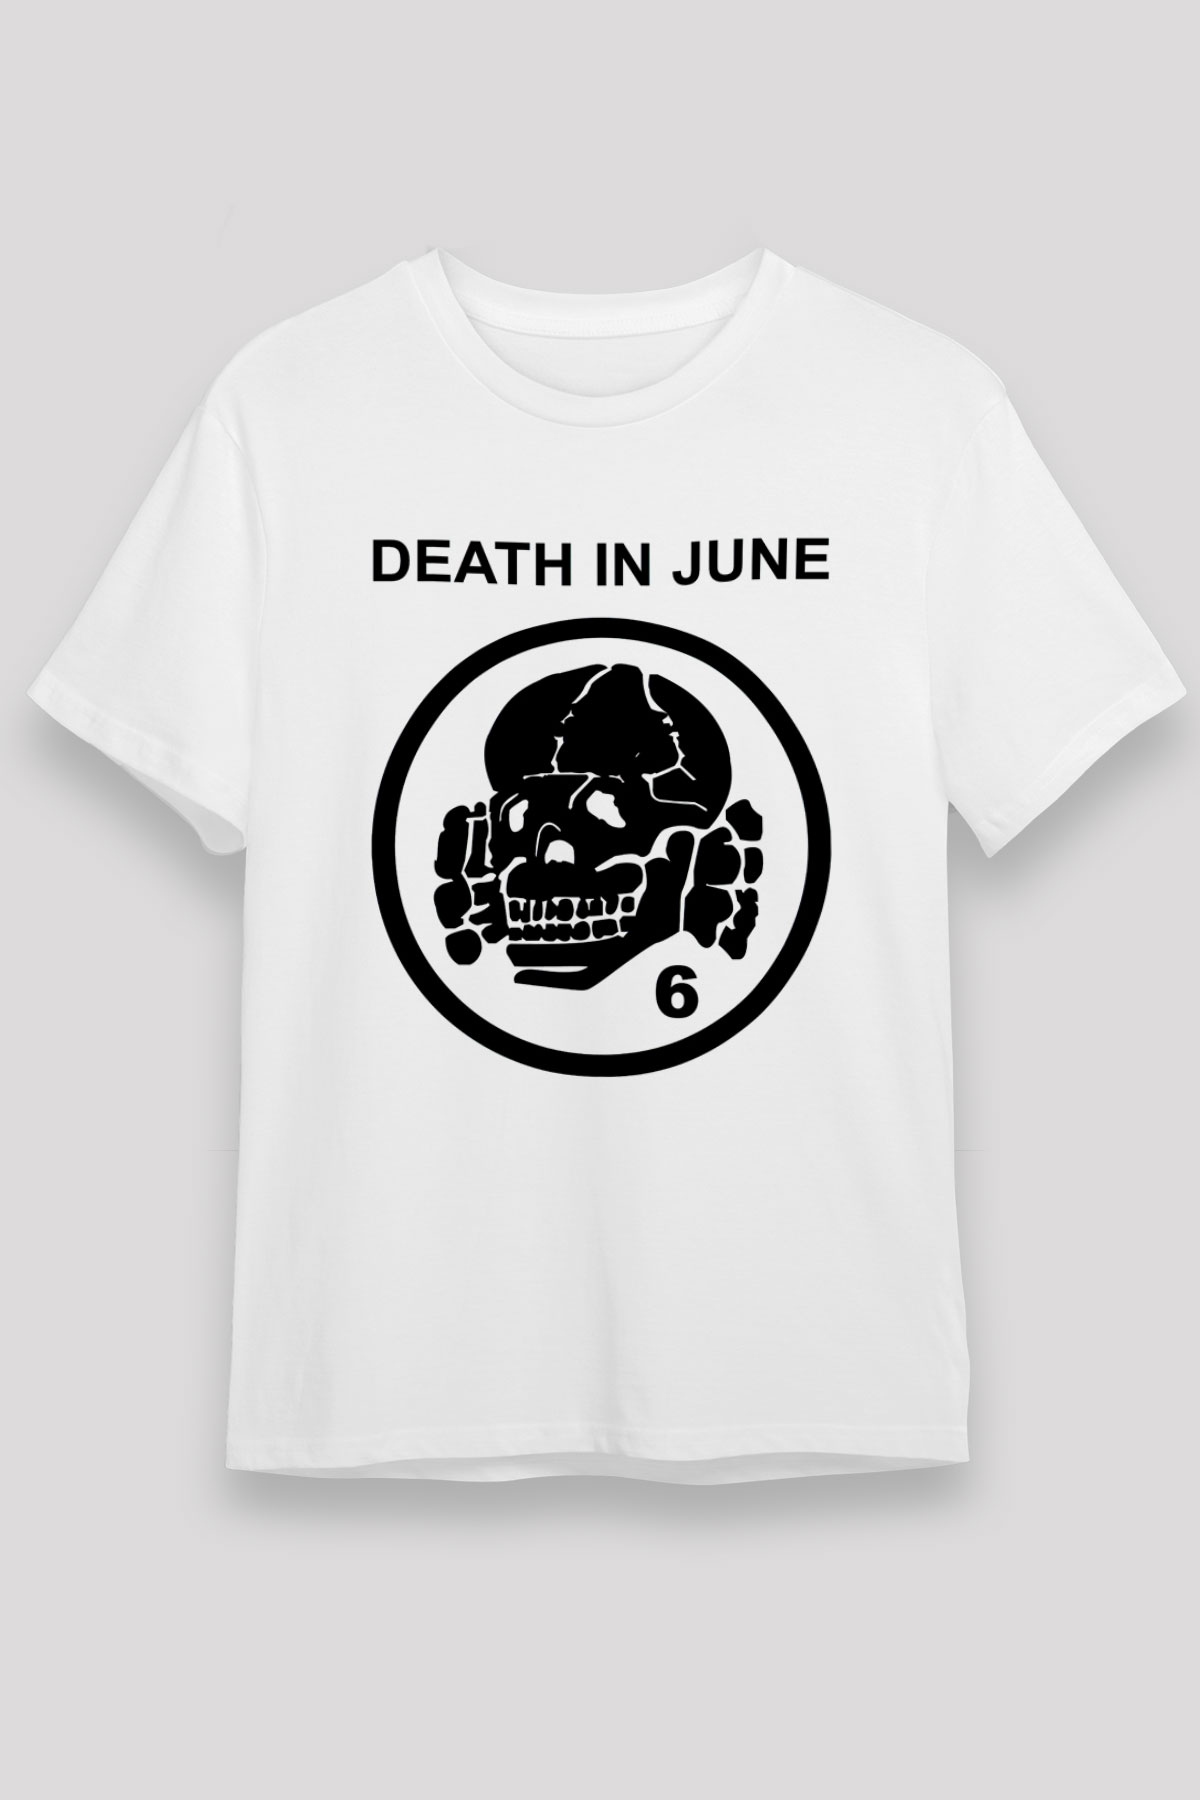 Death in June White Unisex T-Shirt - Tees - Shirts